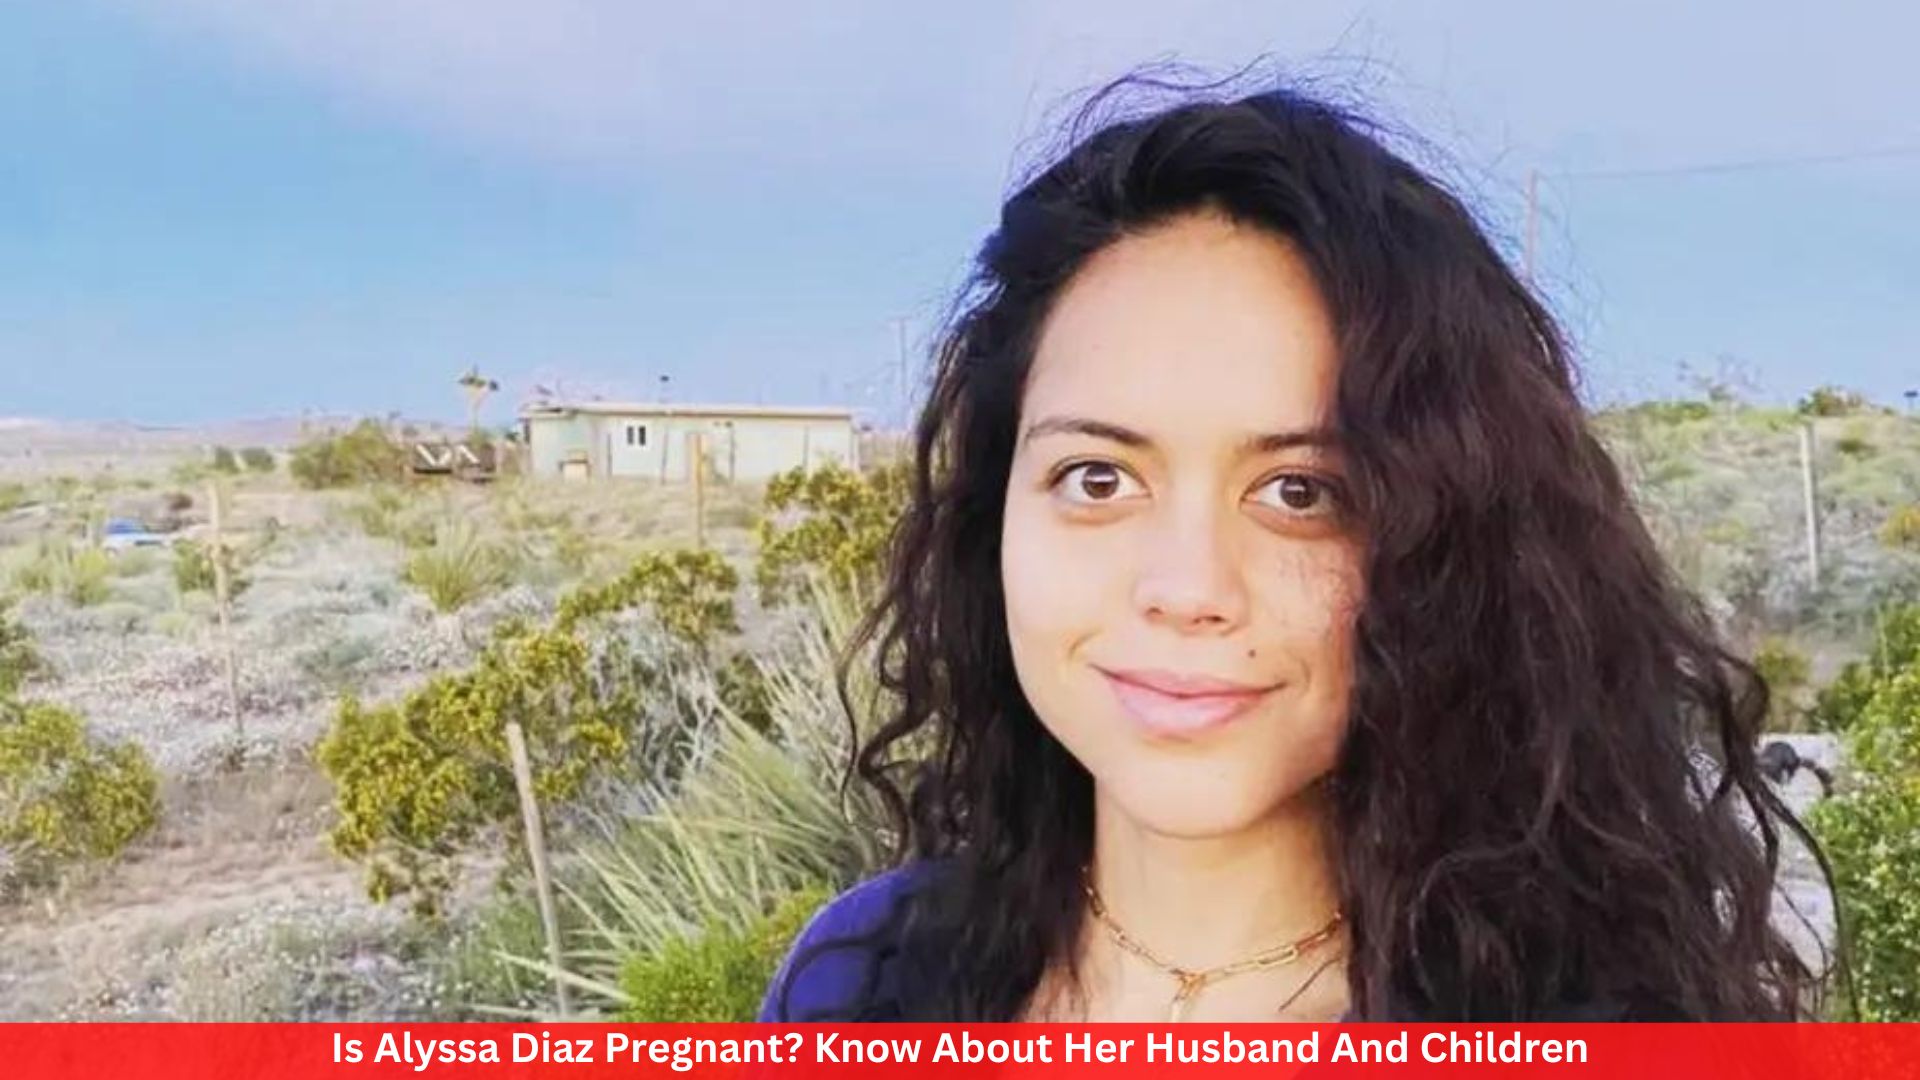 Is Alyssa Diaz Pregnant? Know About Her Husband And Children